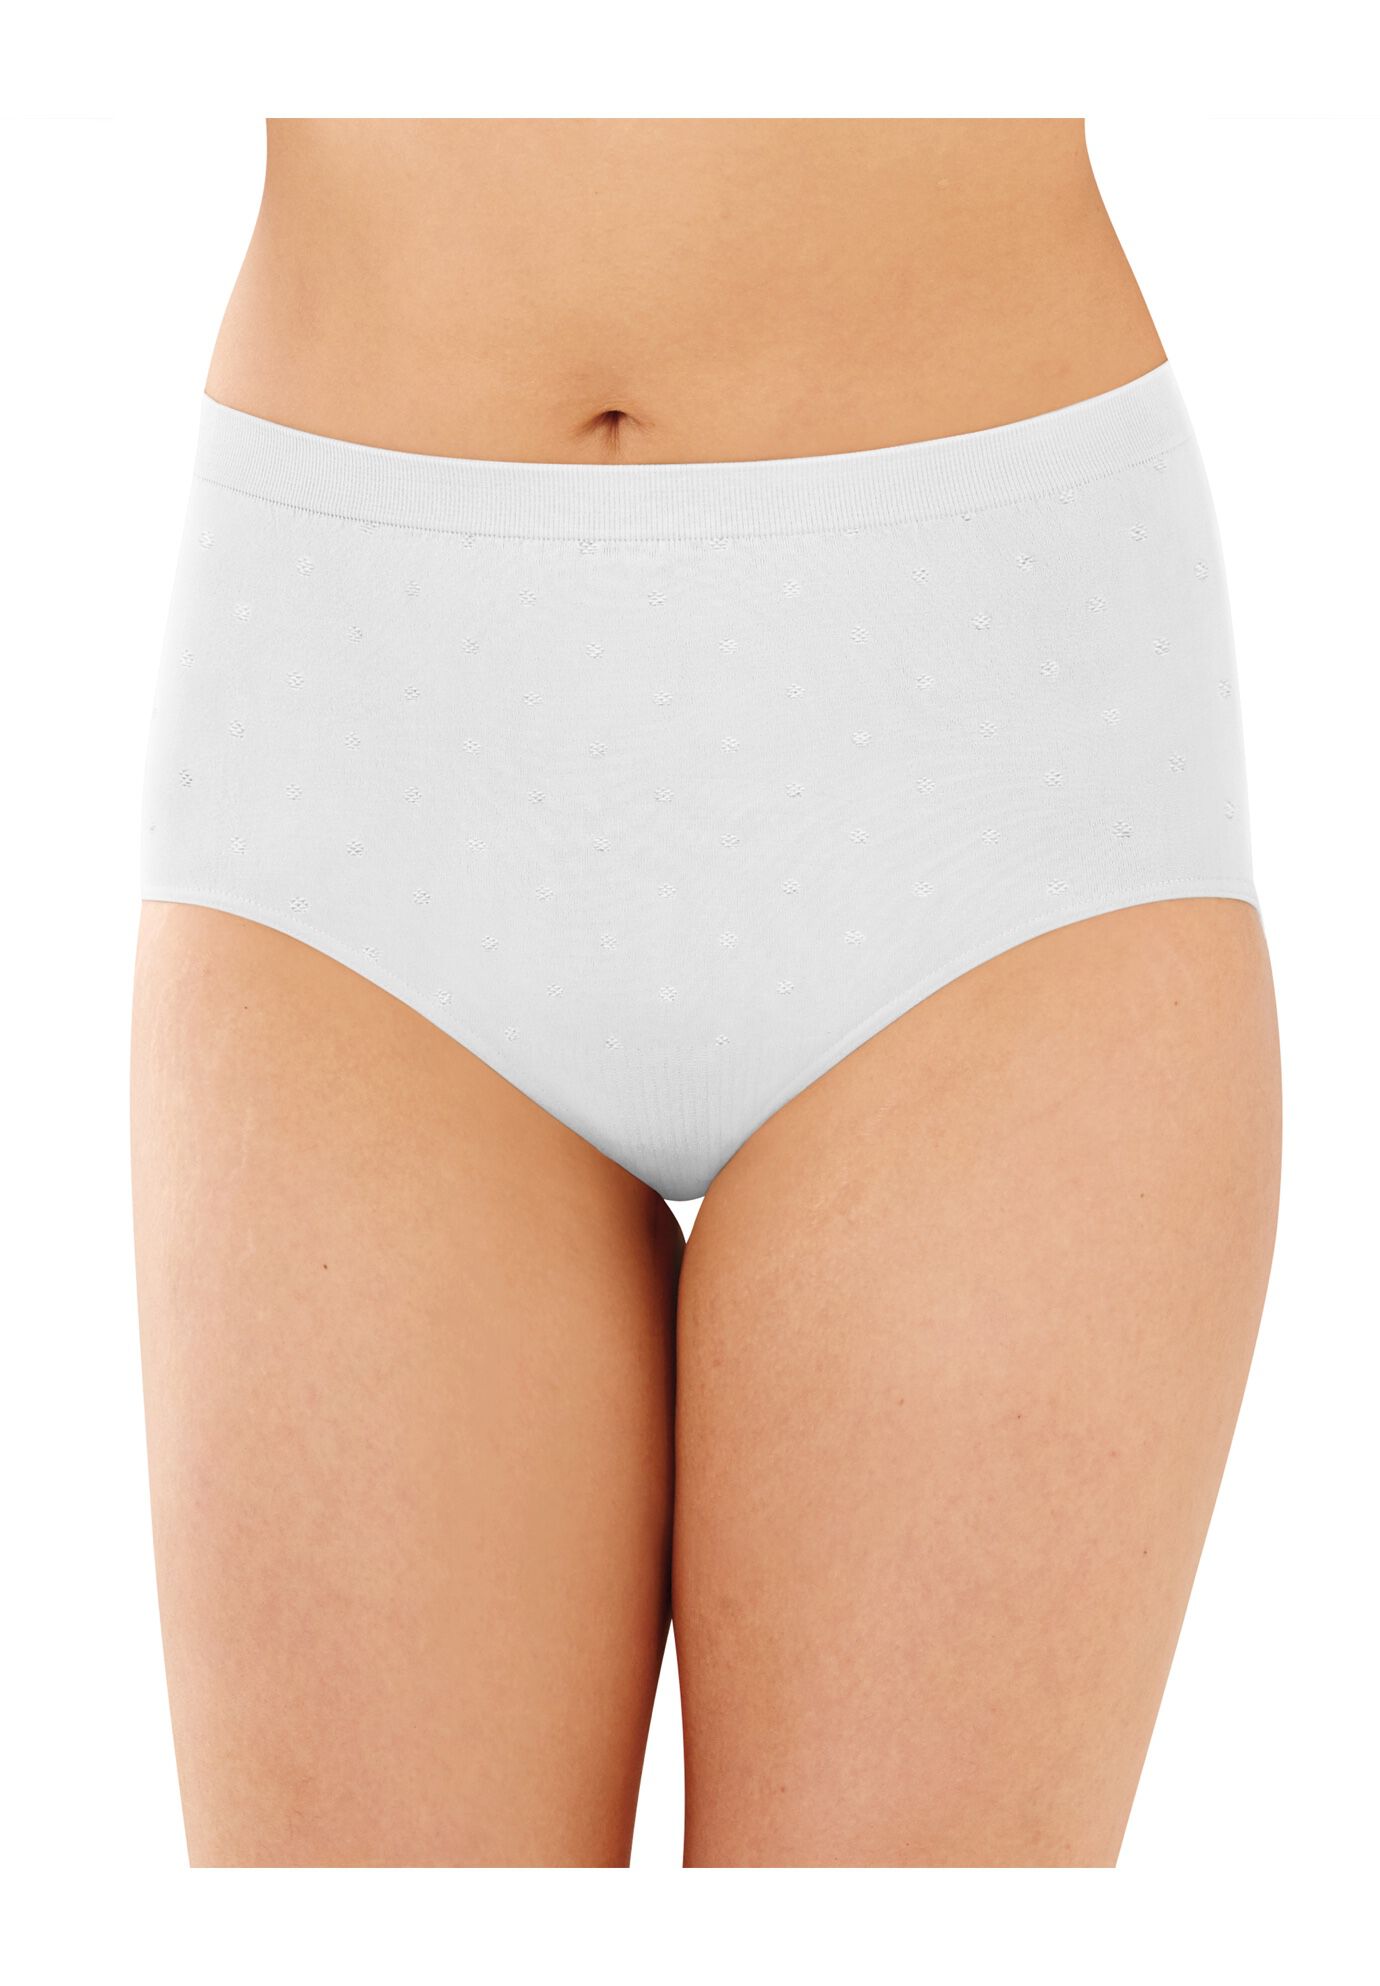 Plus Size Women's Comfort Revolution Brief by Bali in White Dot (Size 7)